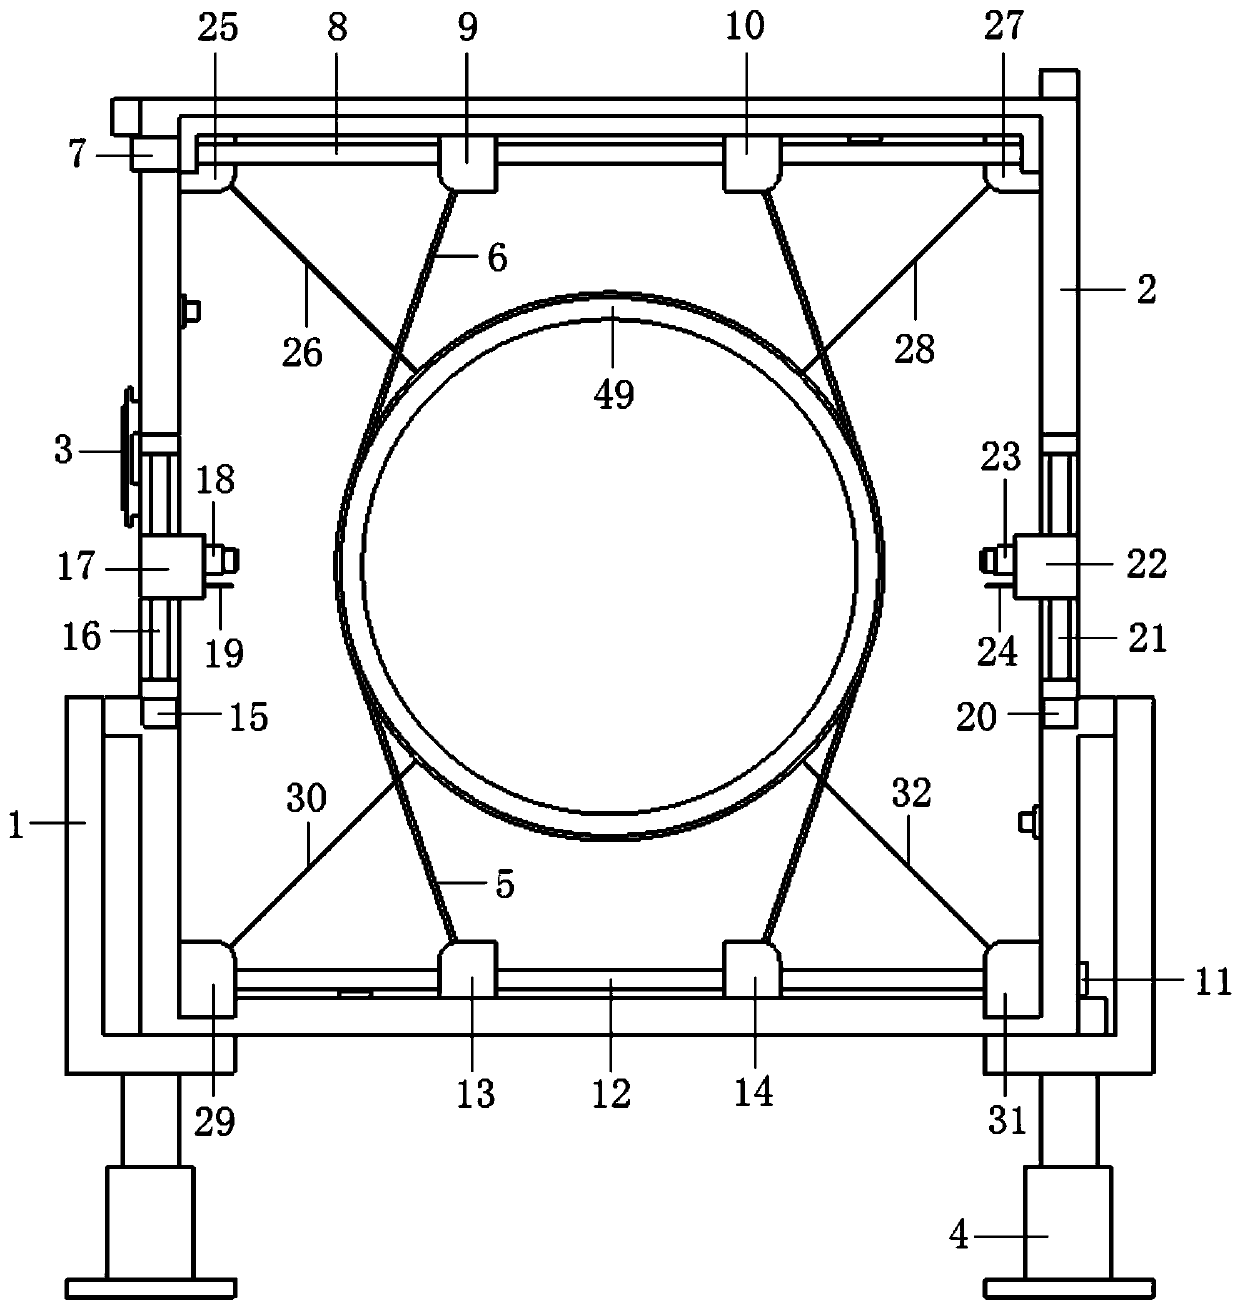 On-line monitoring device for diameter and roundness of expanded pipeline